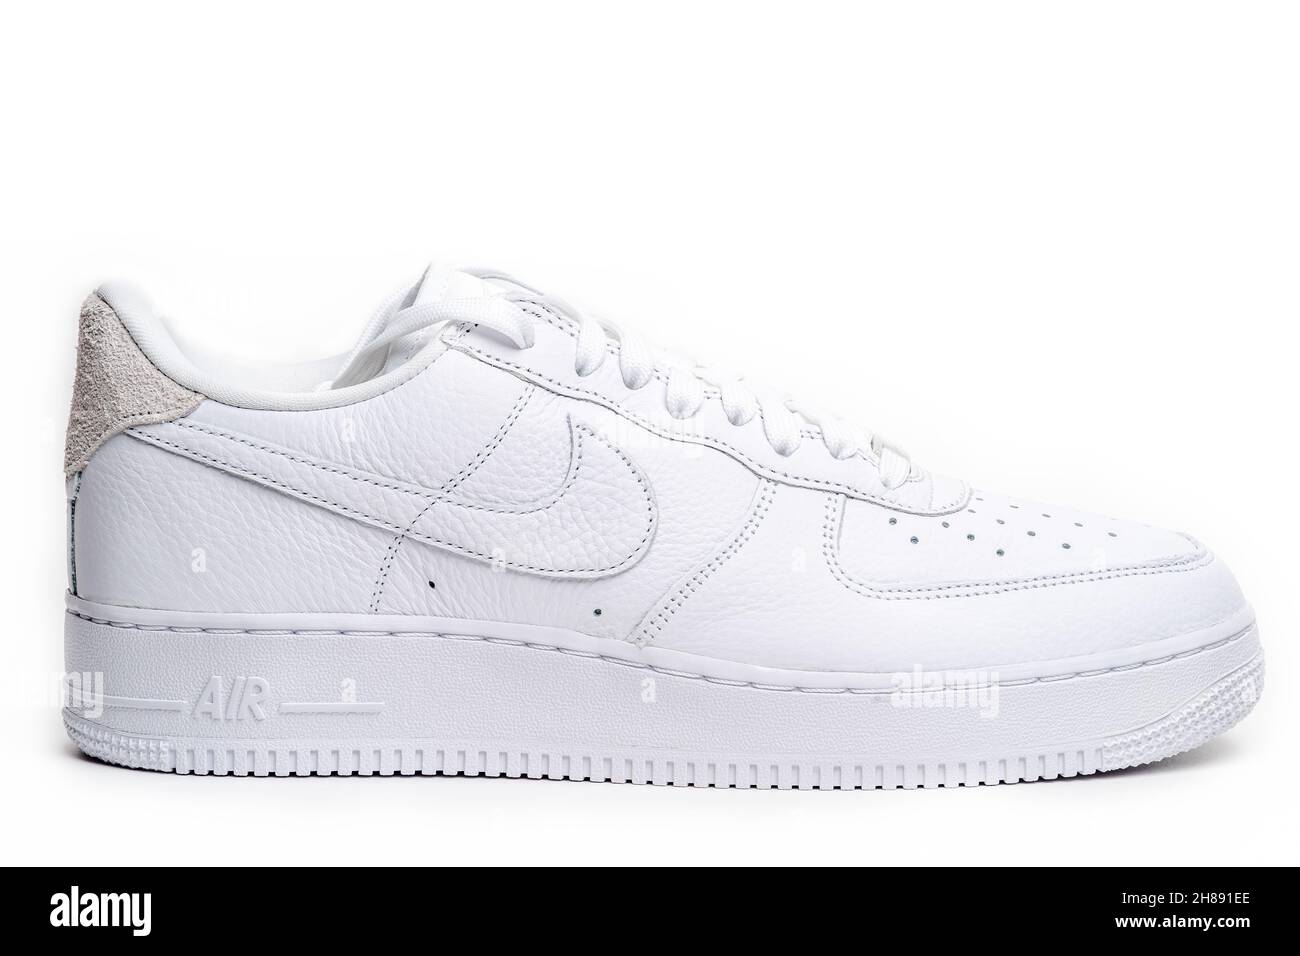 nike air force one sneakers white